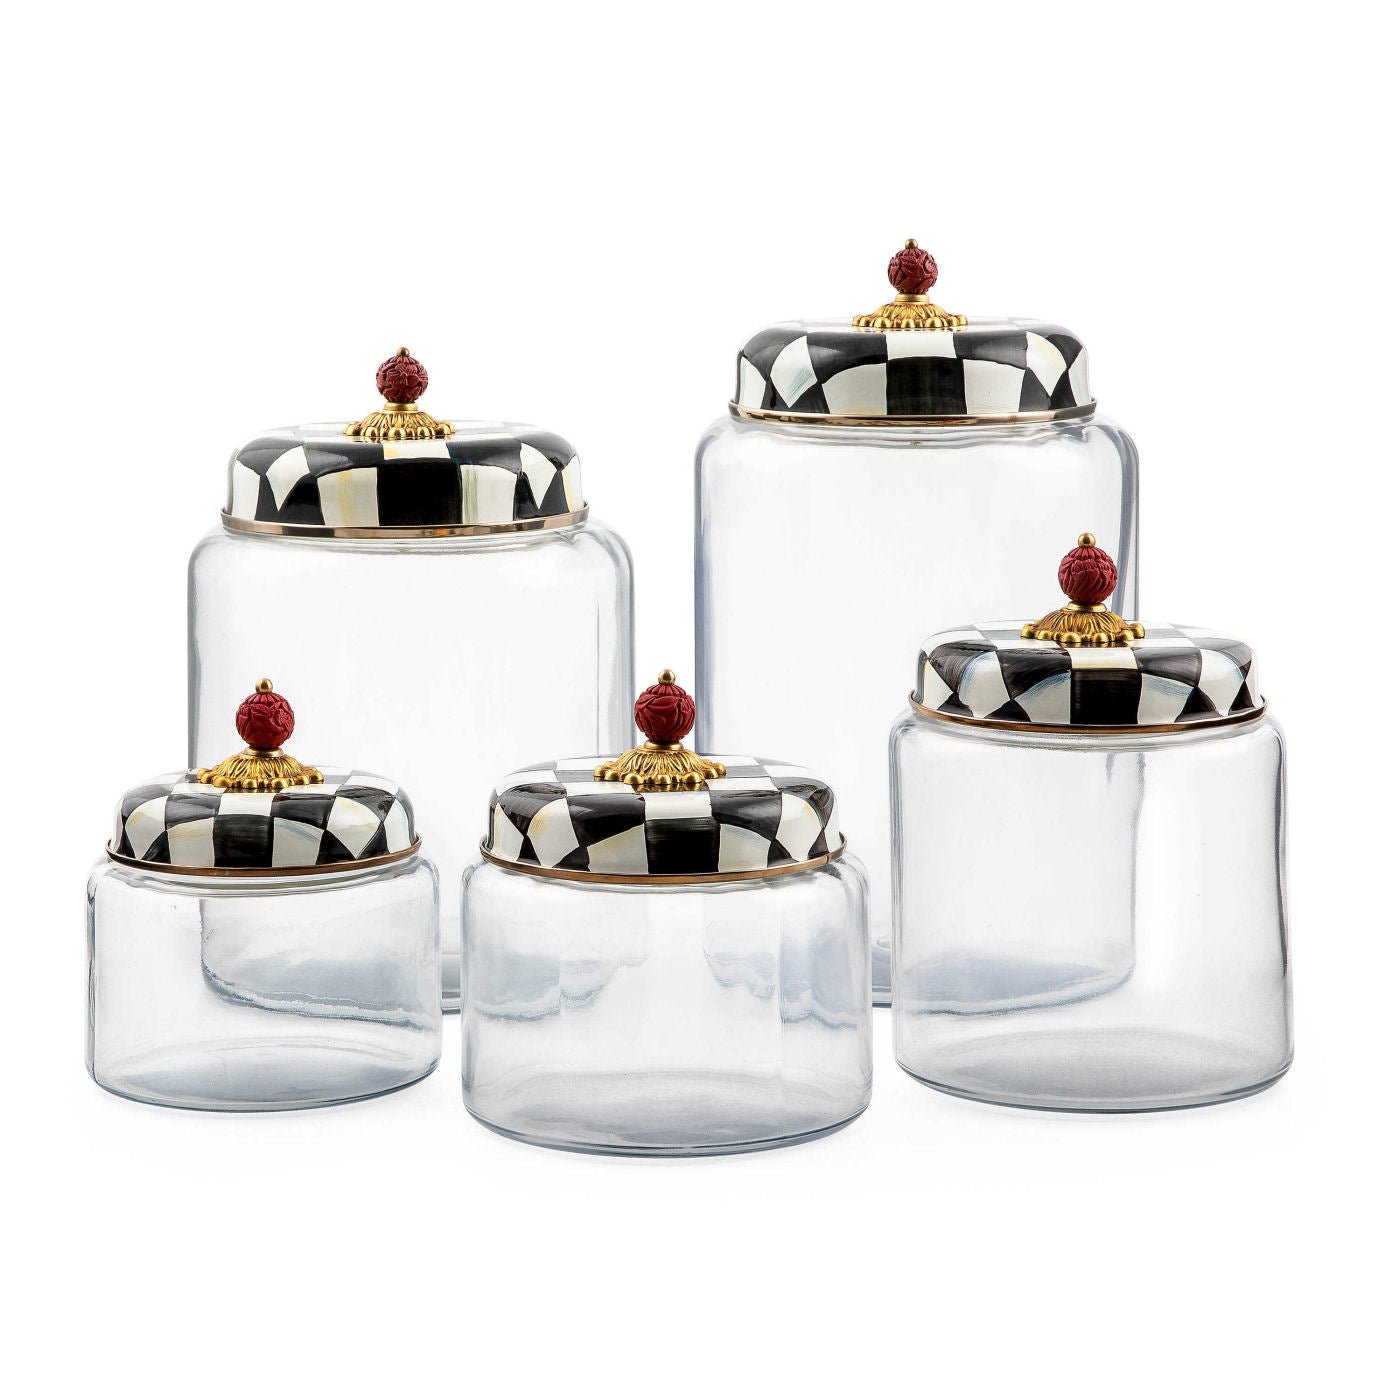 Mackenzie-Childs Courtly Check Kitchen Glass Canister Small - |VESIMI Design| Luxury Bathrooms and Home Decor